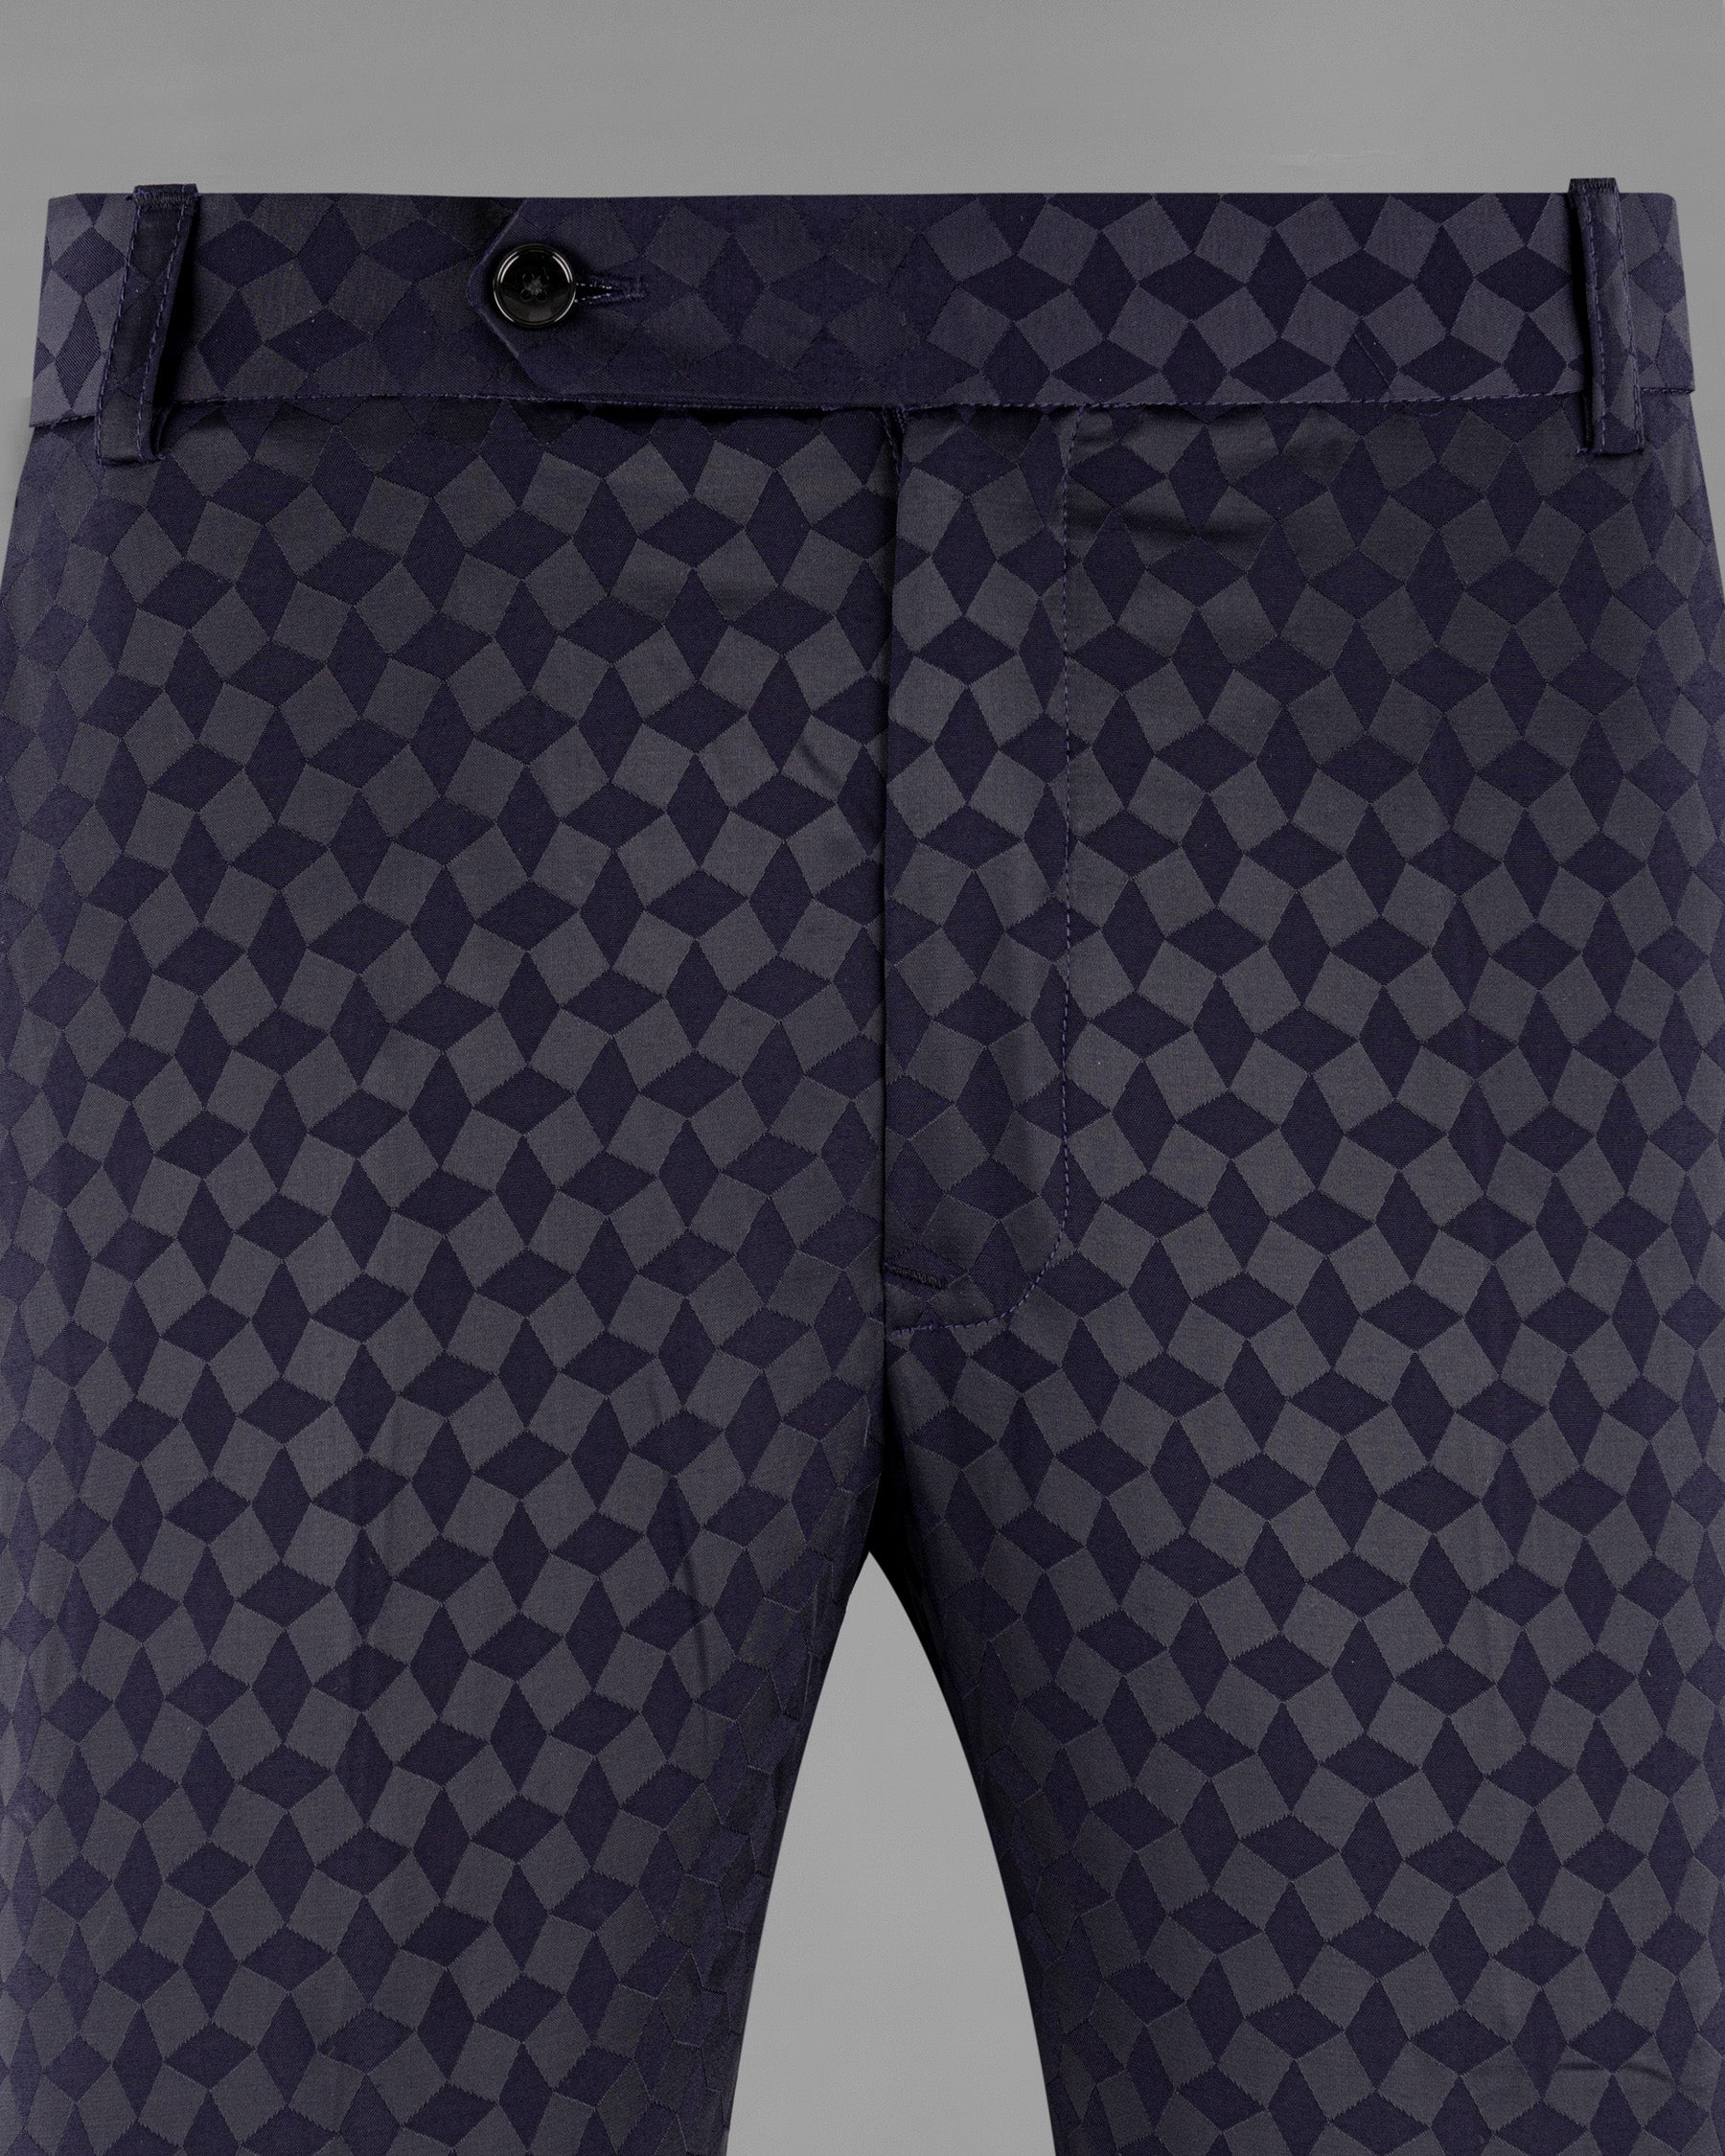 Ship Gray and Charade Blue Diamond Pattern Wool Rich Pant T1218-28, T1218-30, T1218-32, T1218-34, T1218-36, T1218-38, T1218-40, T1218-42, T1218-44